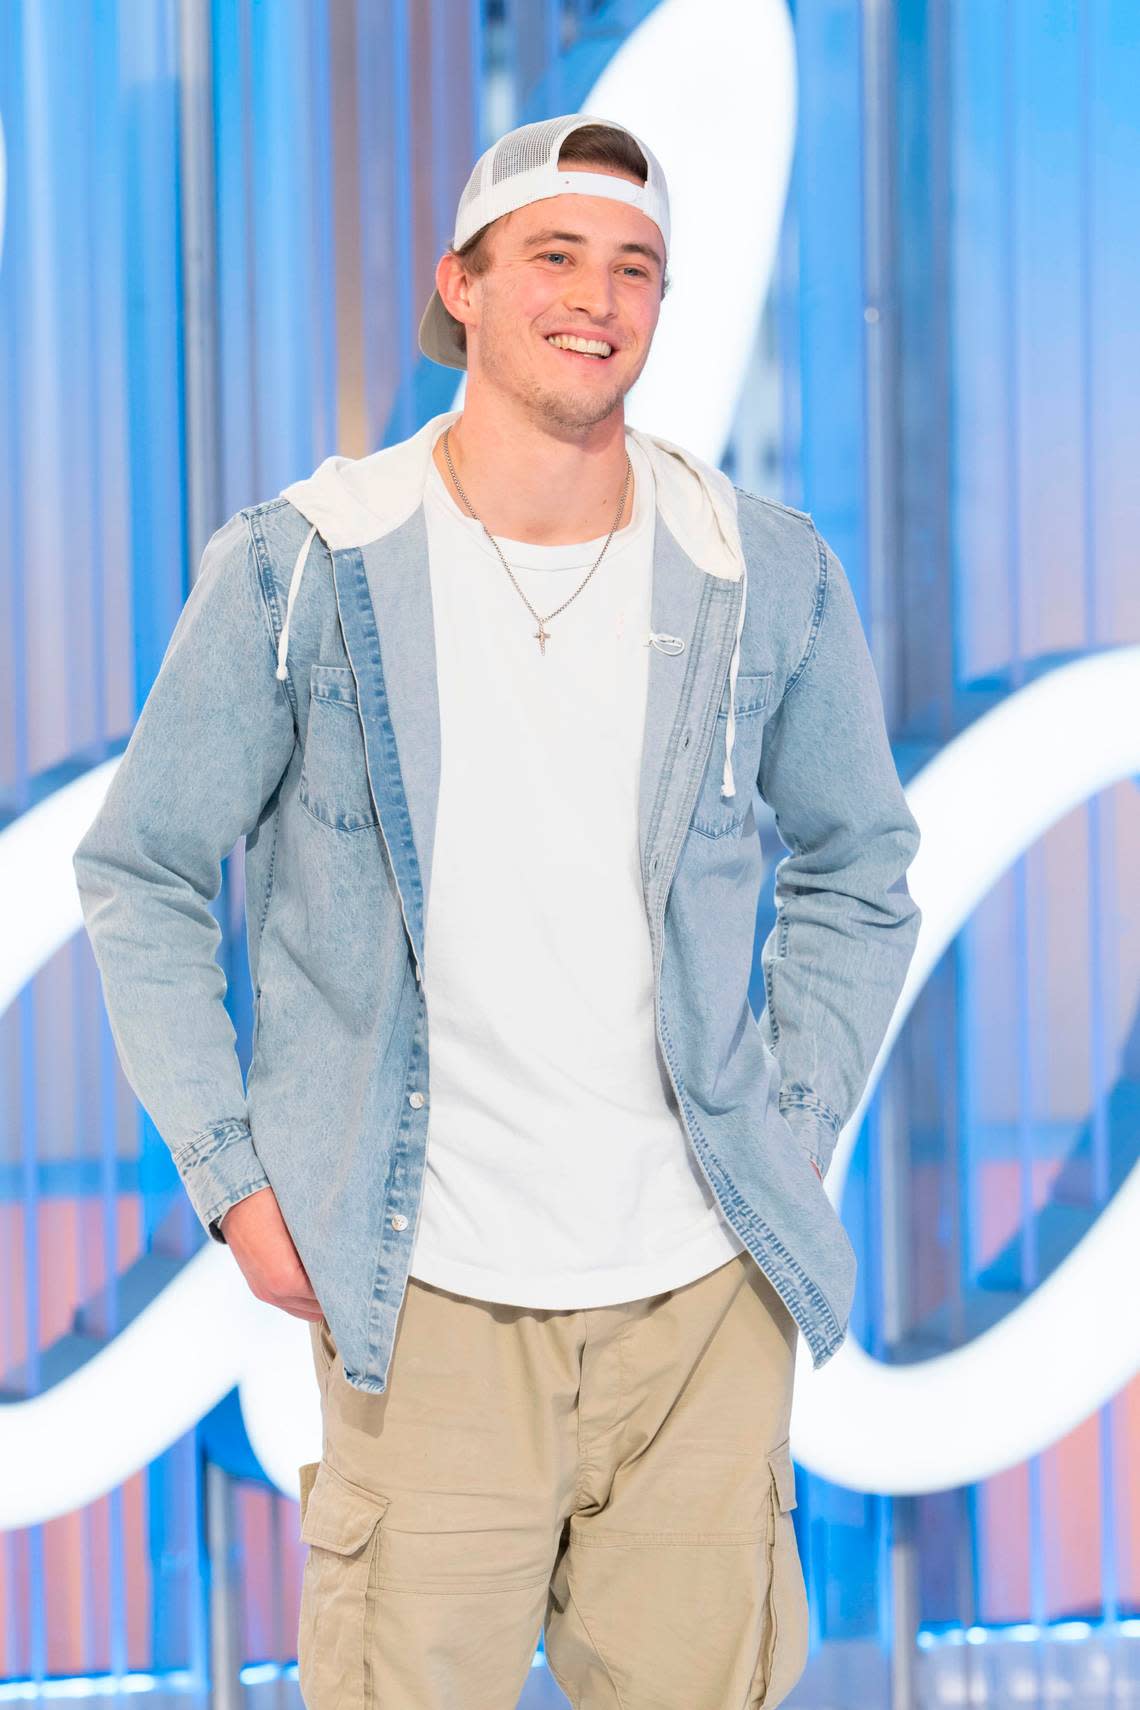 Blake Proehl, a Charlotte native and former player for the NFL with family ties to the Carolina Panthers, auditions for Season 22 of “American Idol” on ABC.